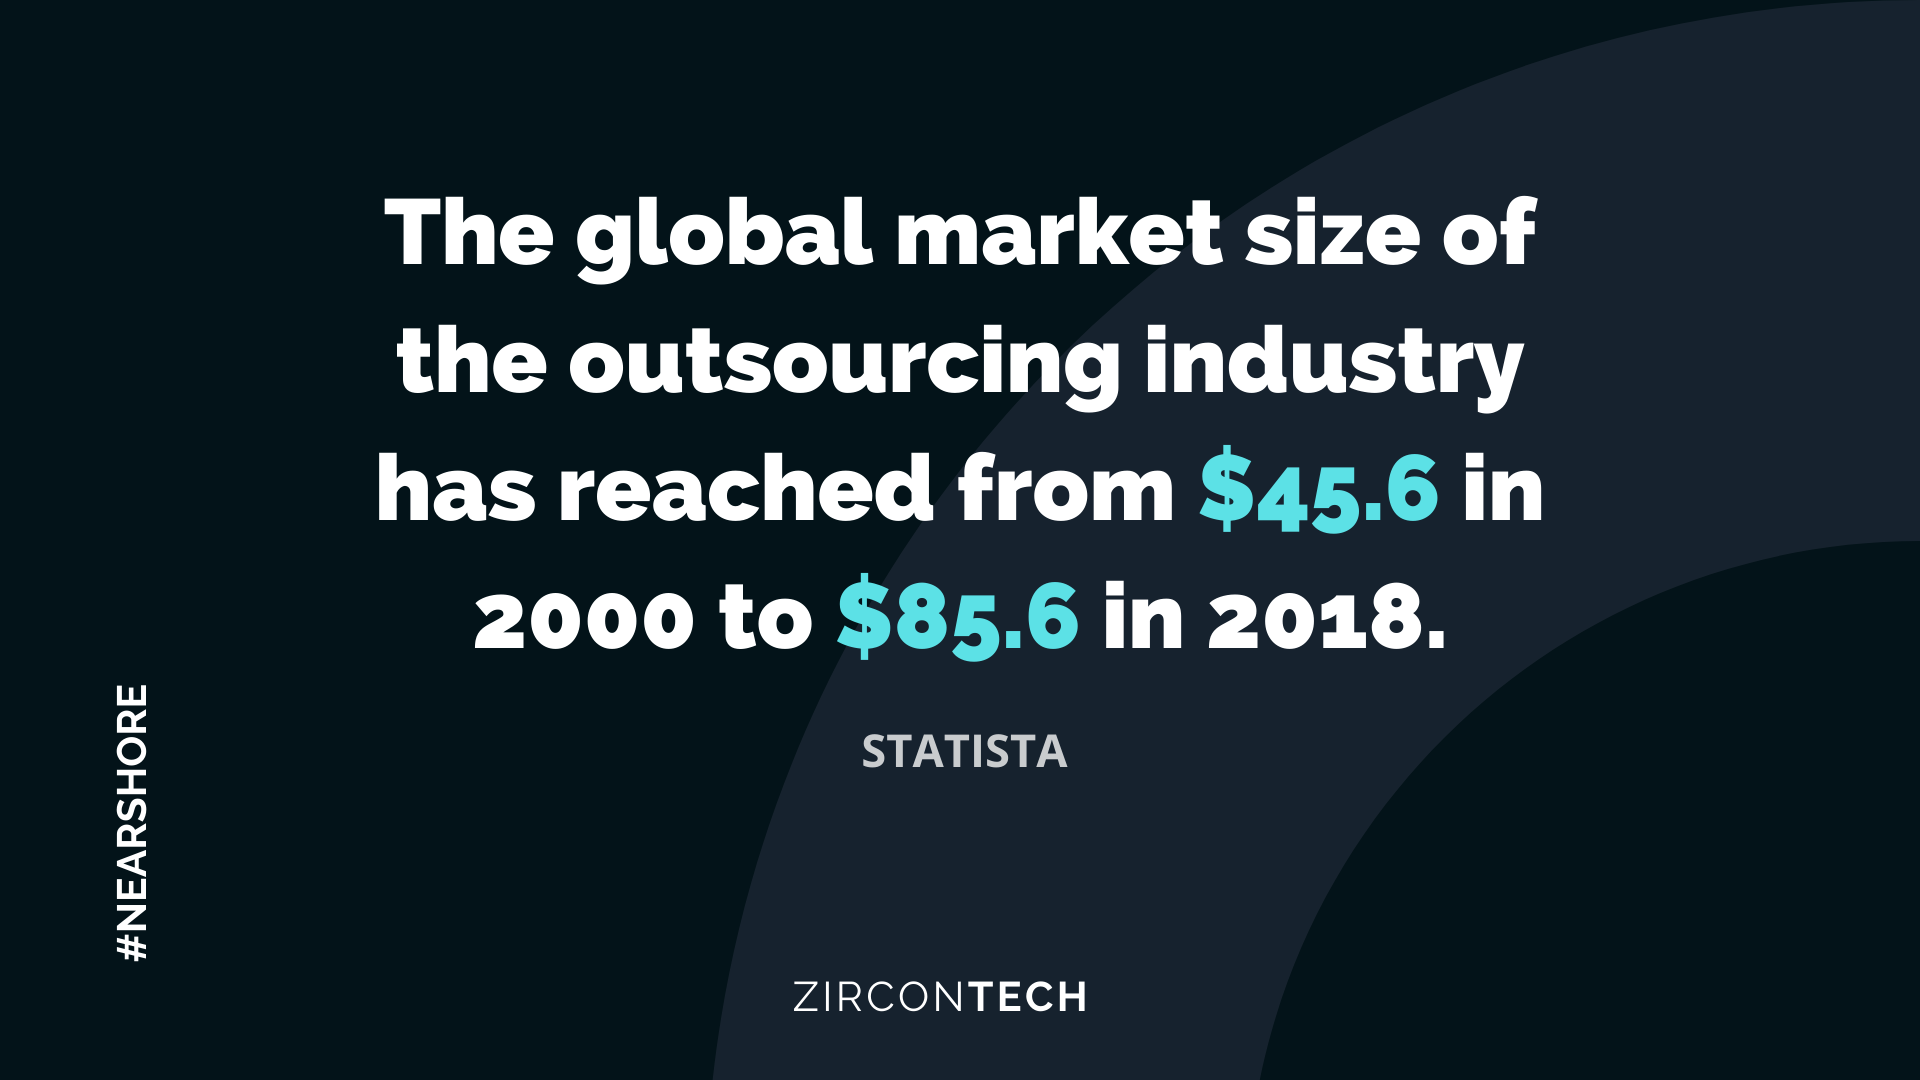 Nearshore outsourcing can offer at least 30% of growth to markets by the end of 2022.